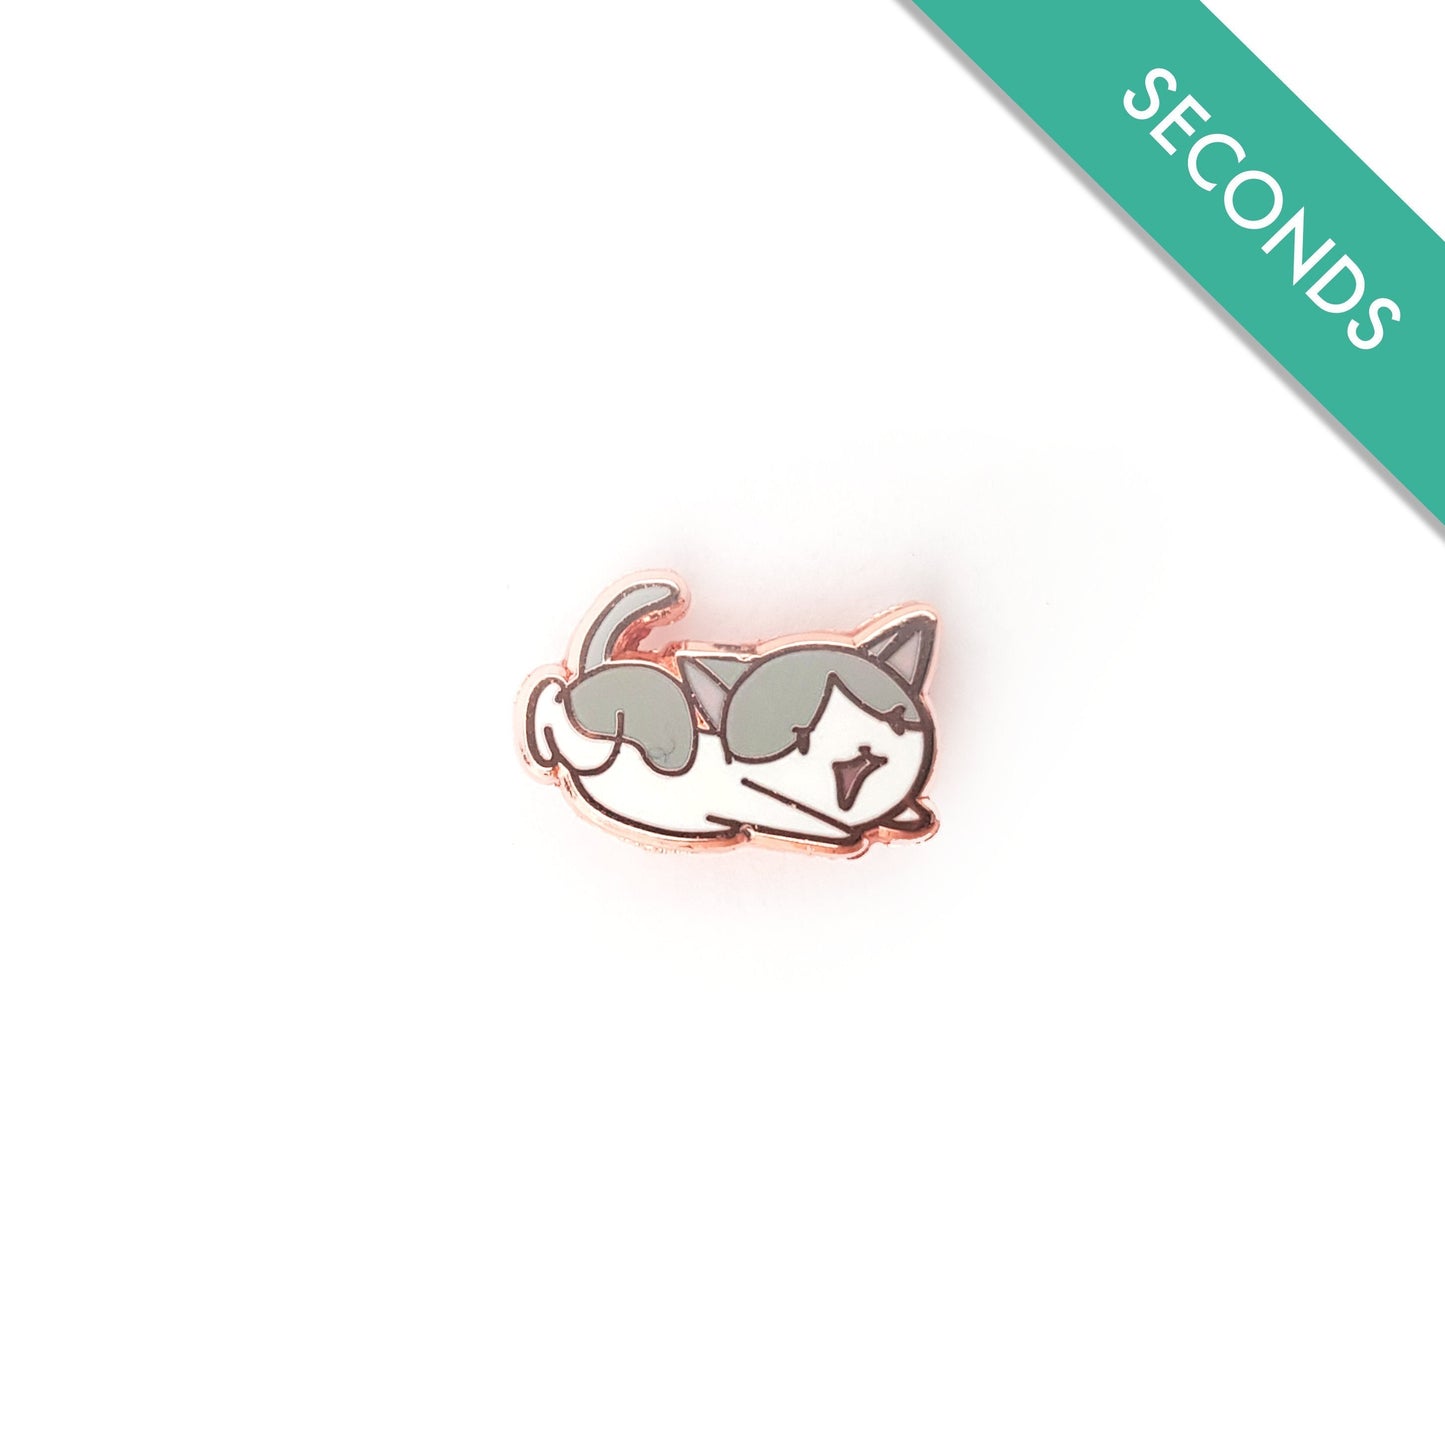 Pouncing Kitty - Pin Seconds - Tiny Enamel Pin, Mac the Special Needs Cat